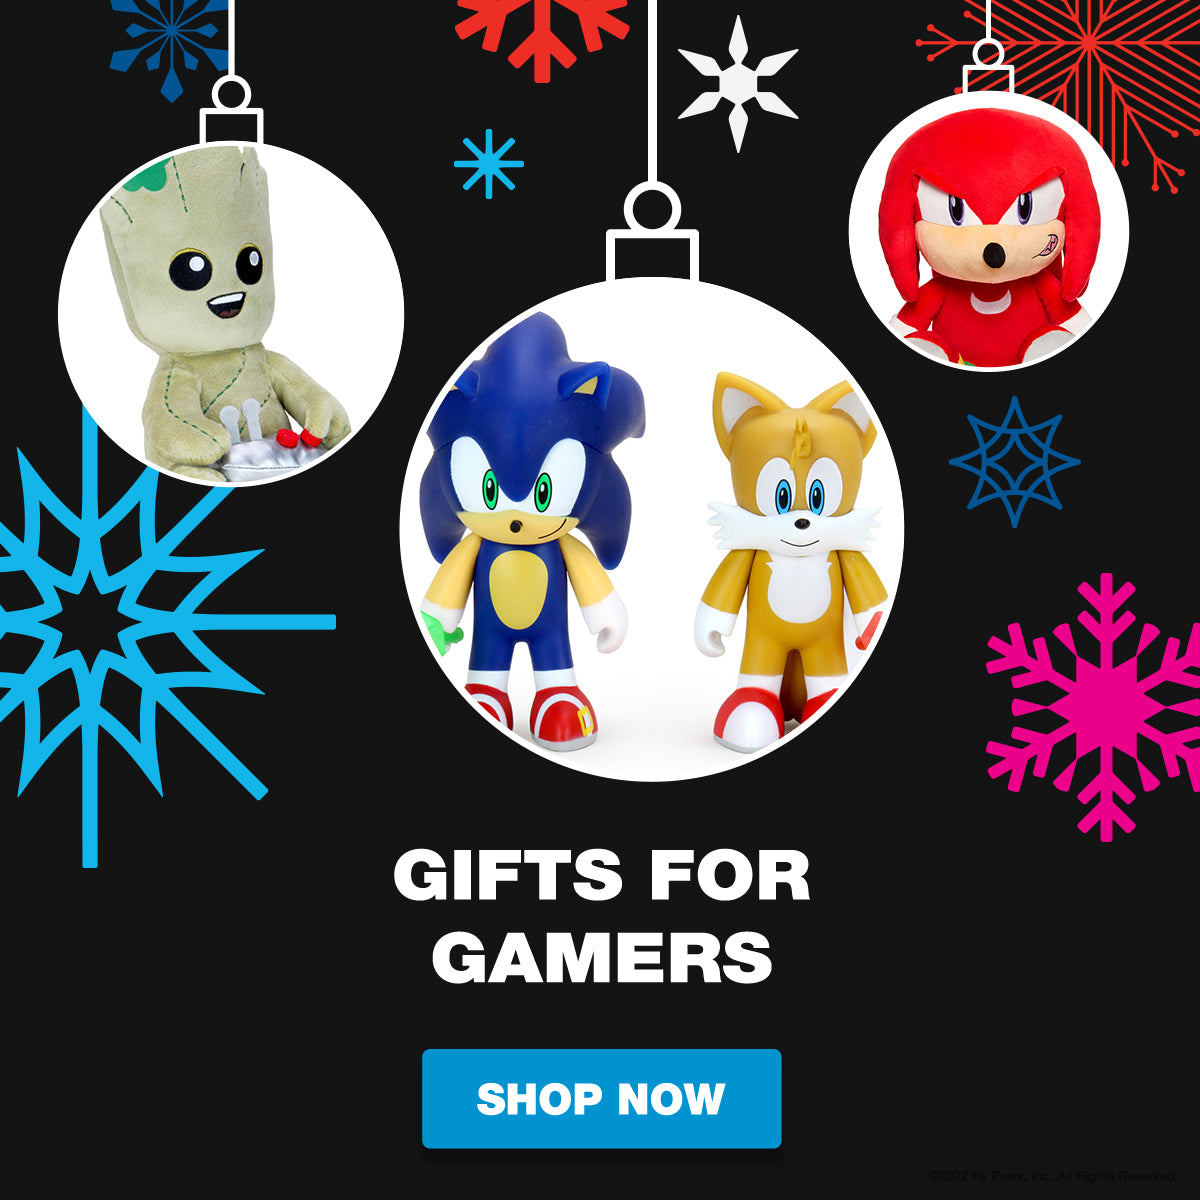 Gifts for the Gamer - Video Game gifts